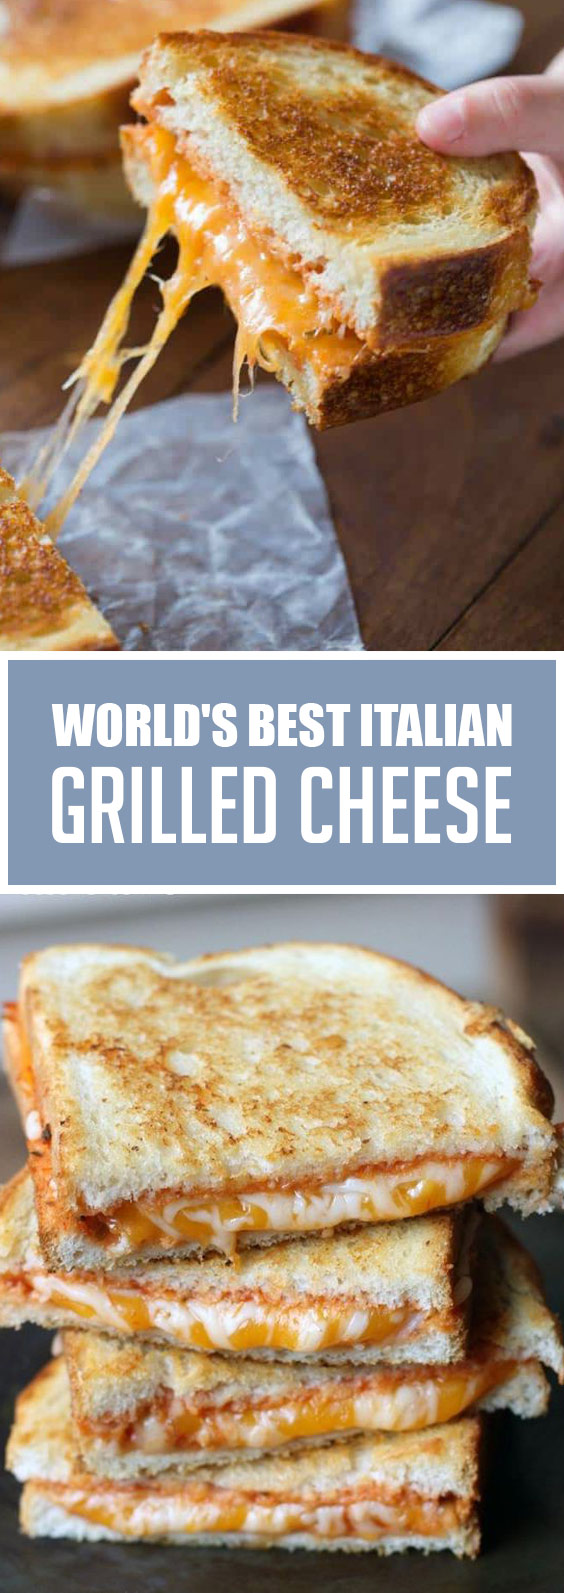 Worlds Best Italian Grilled Cheese #sandwiches #grilledcheese